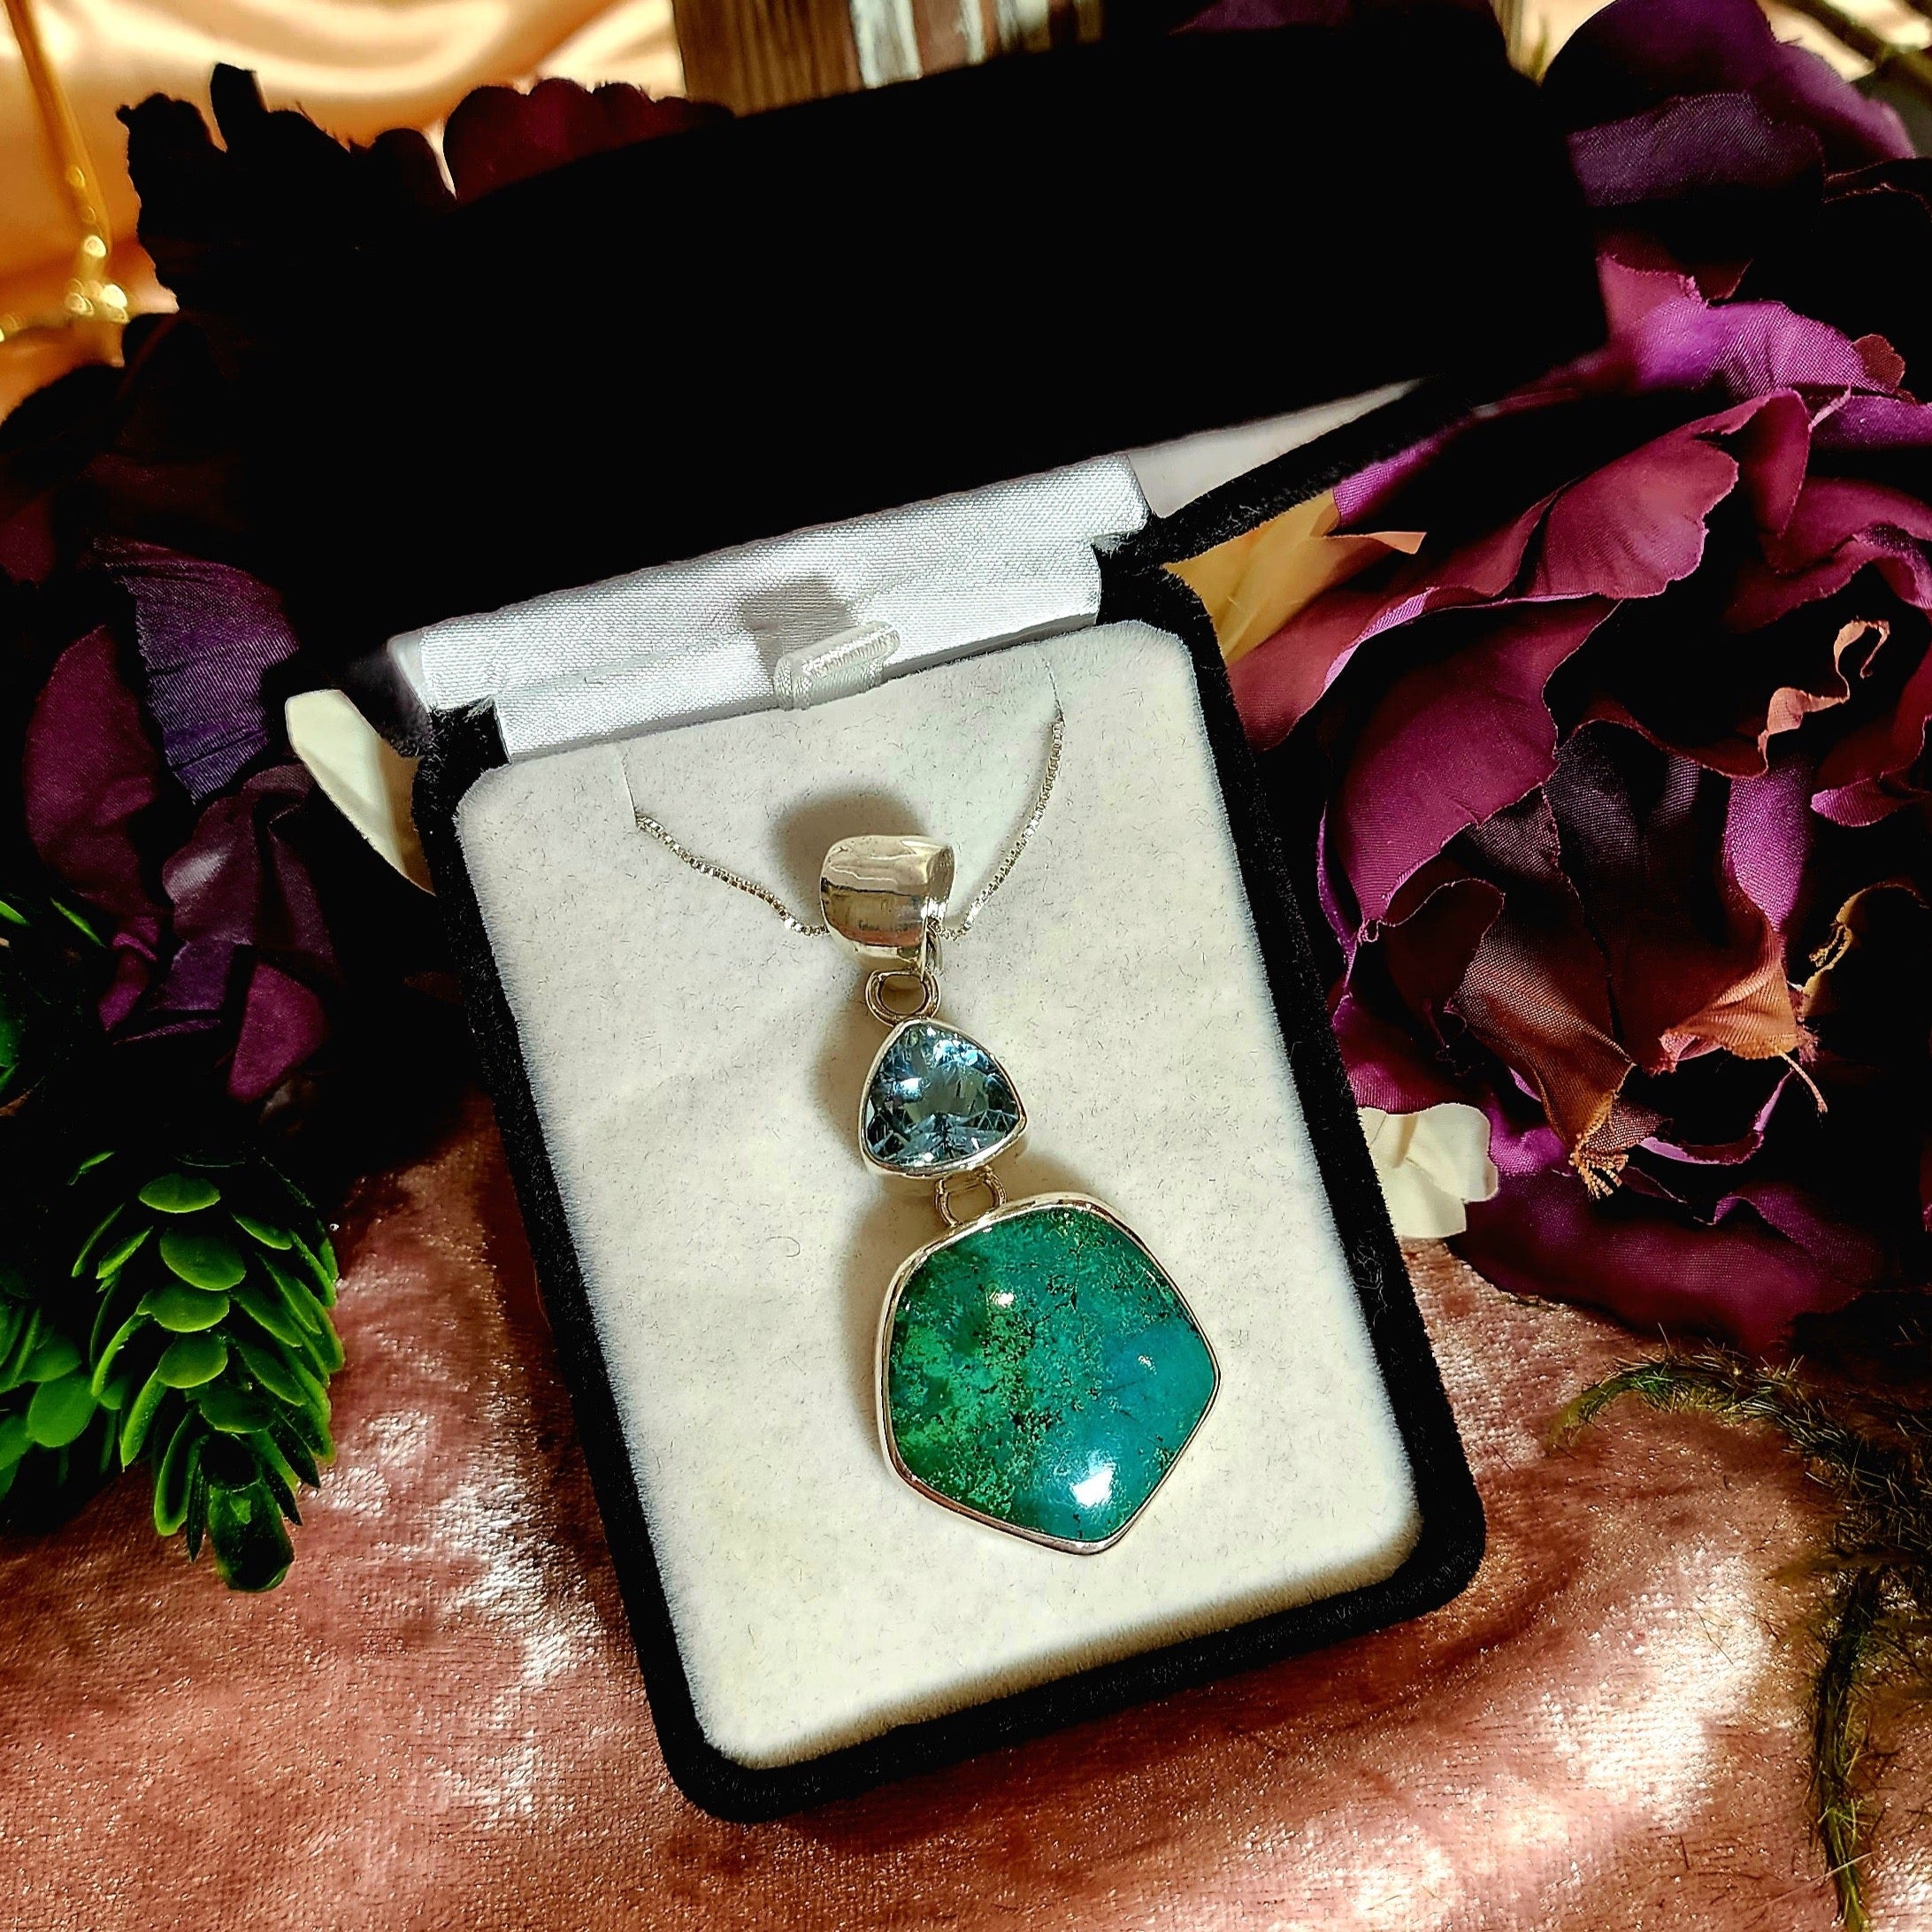 Chrysocolla and Blue Andara Glass Necklace for Empowerment, Peace and Universal Wisdom